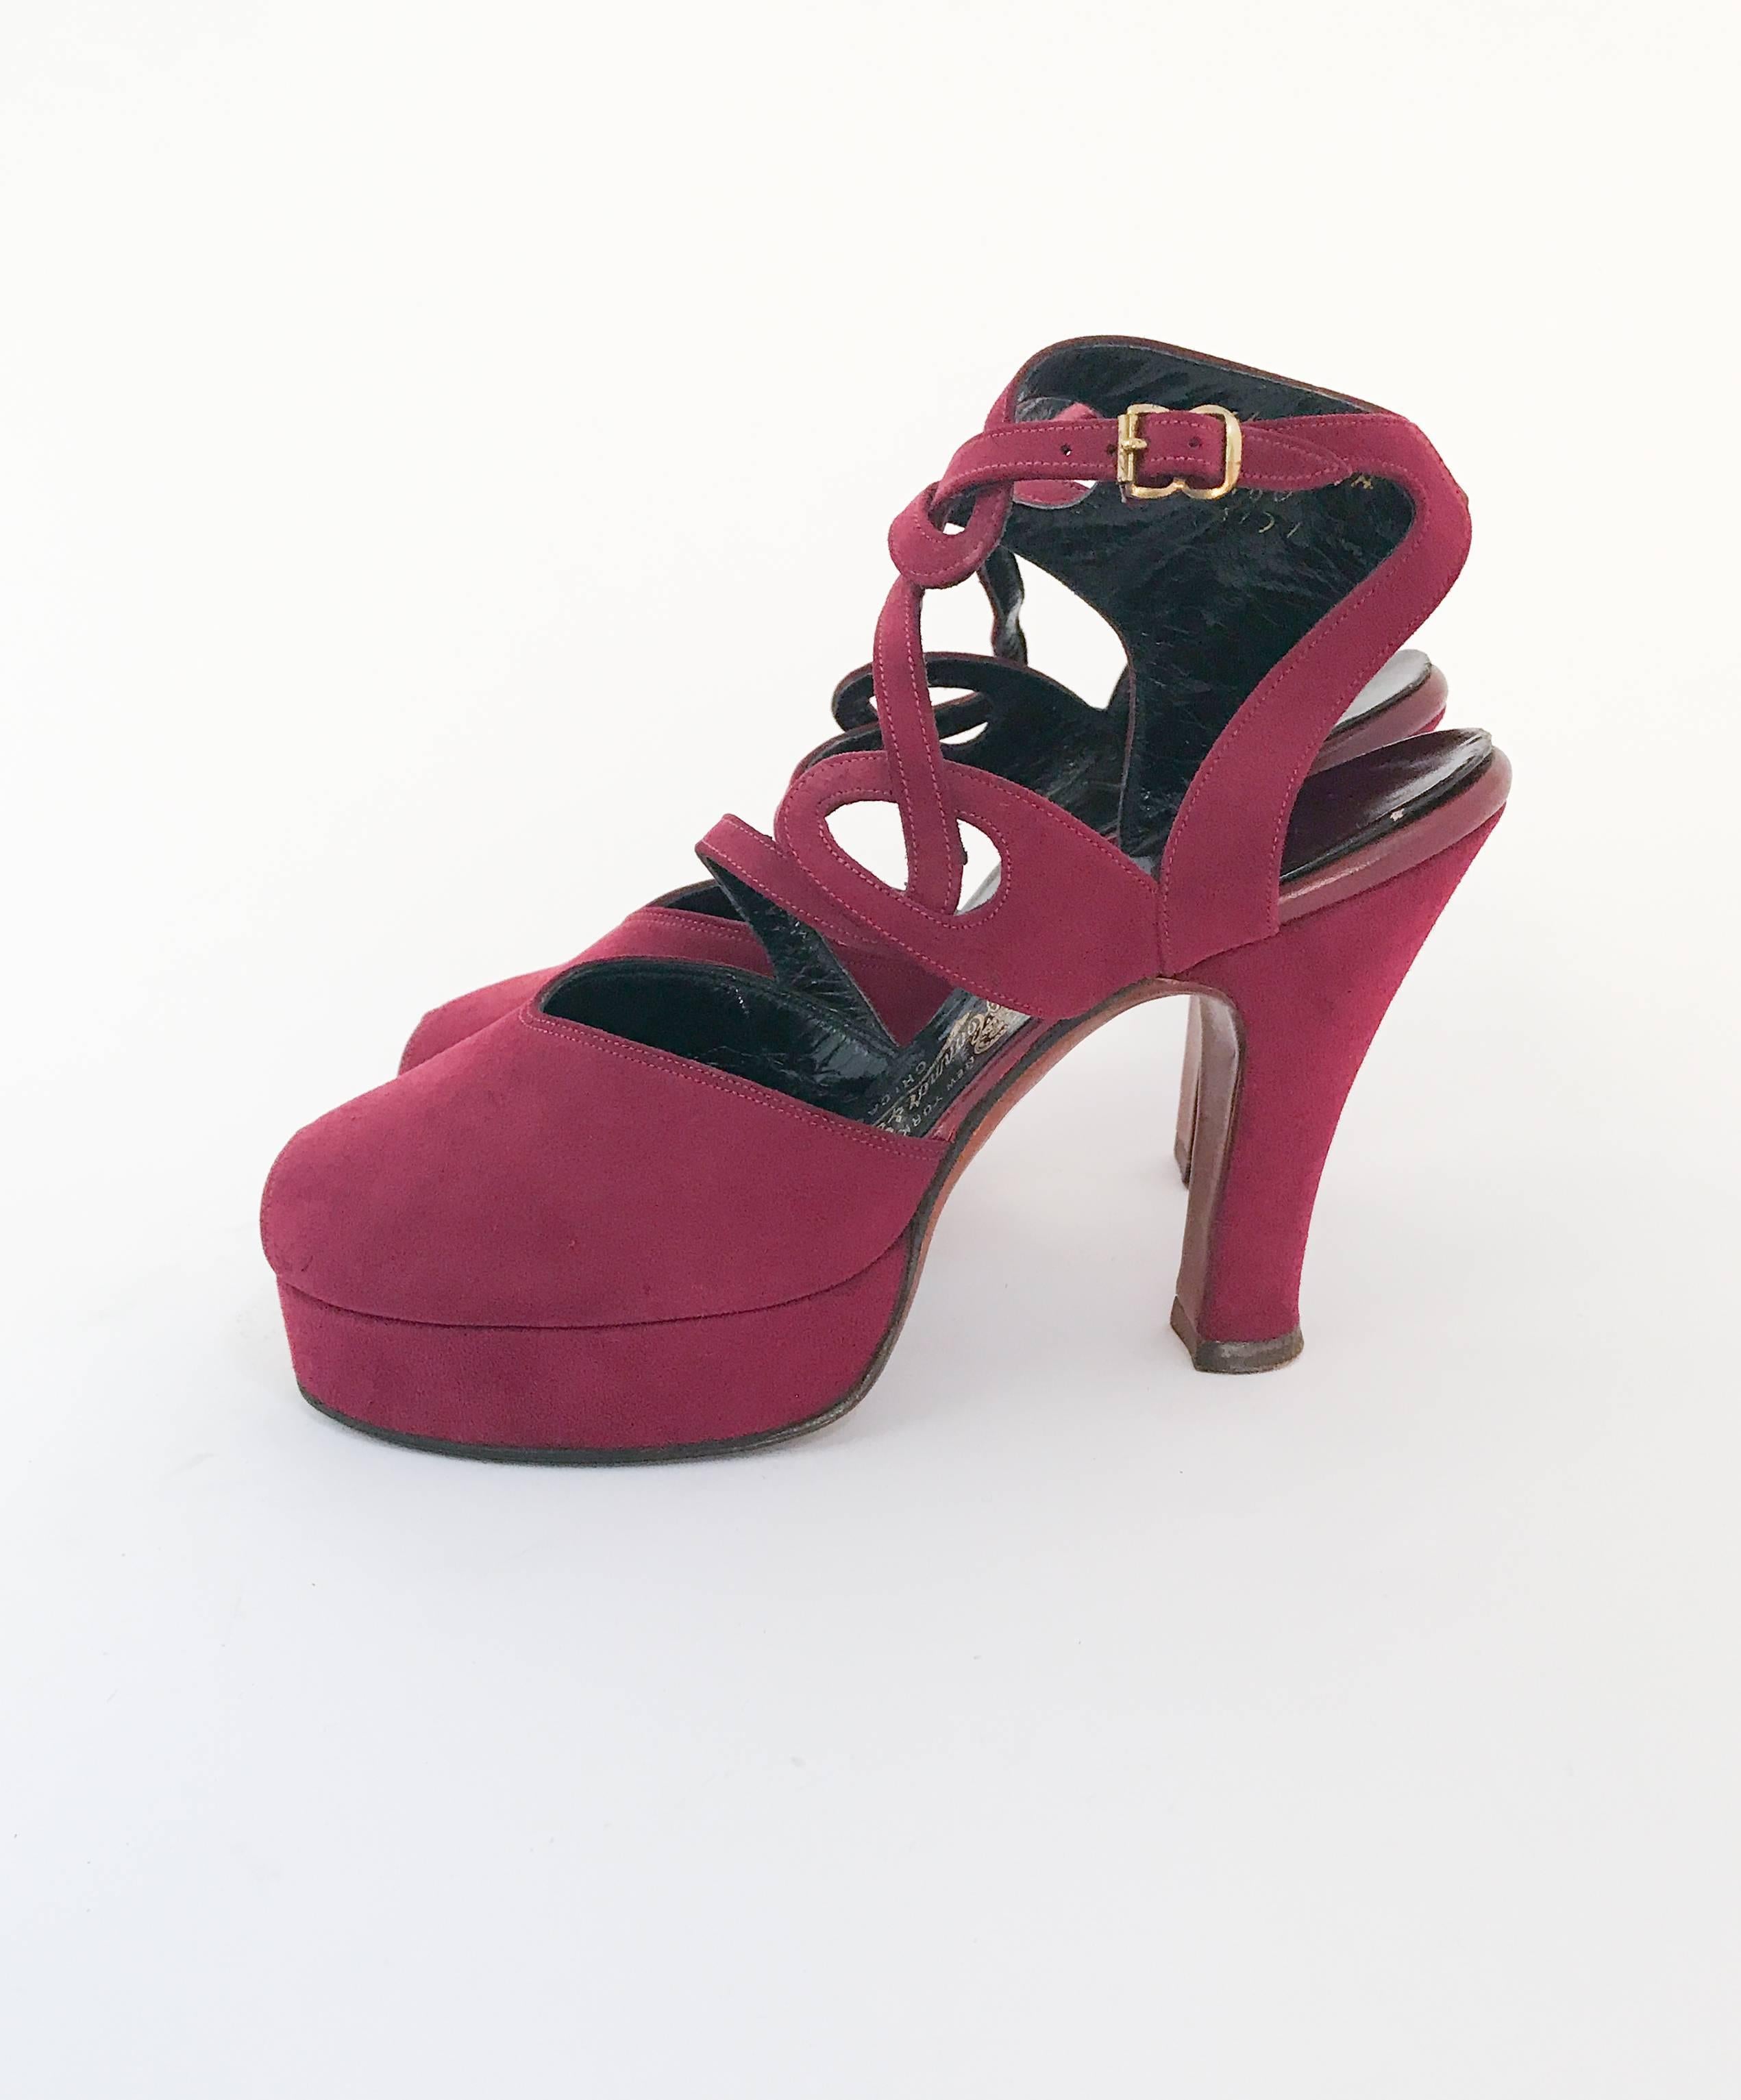 Brown 1947 Plum Suede Heels With Strap and Cut-out Accents For Sale